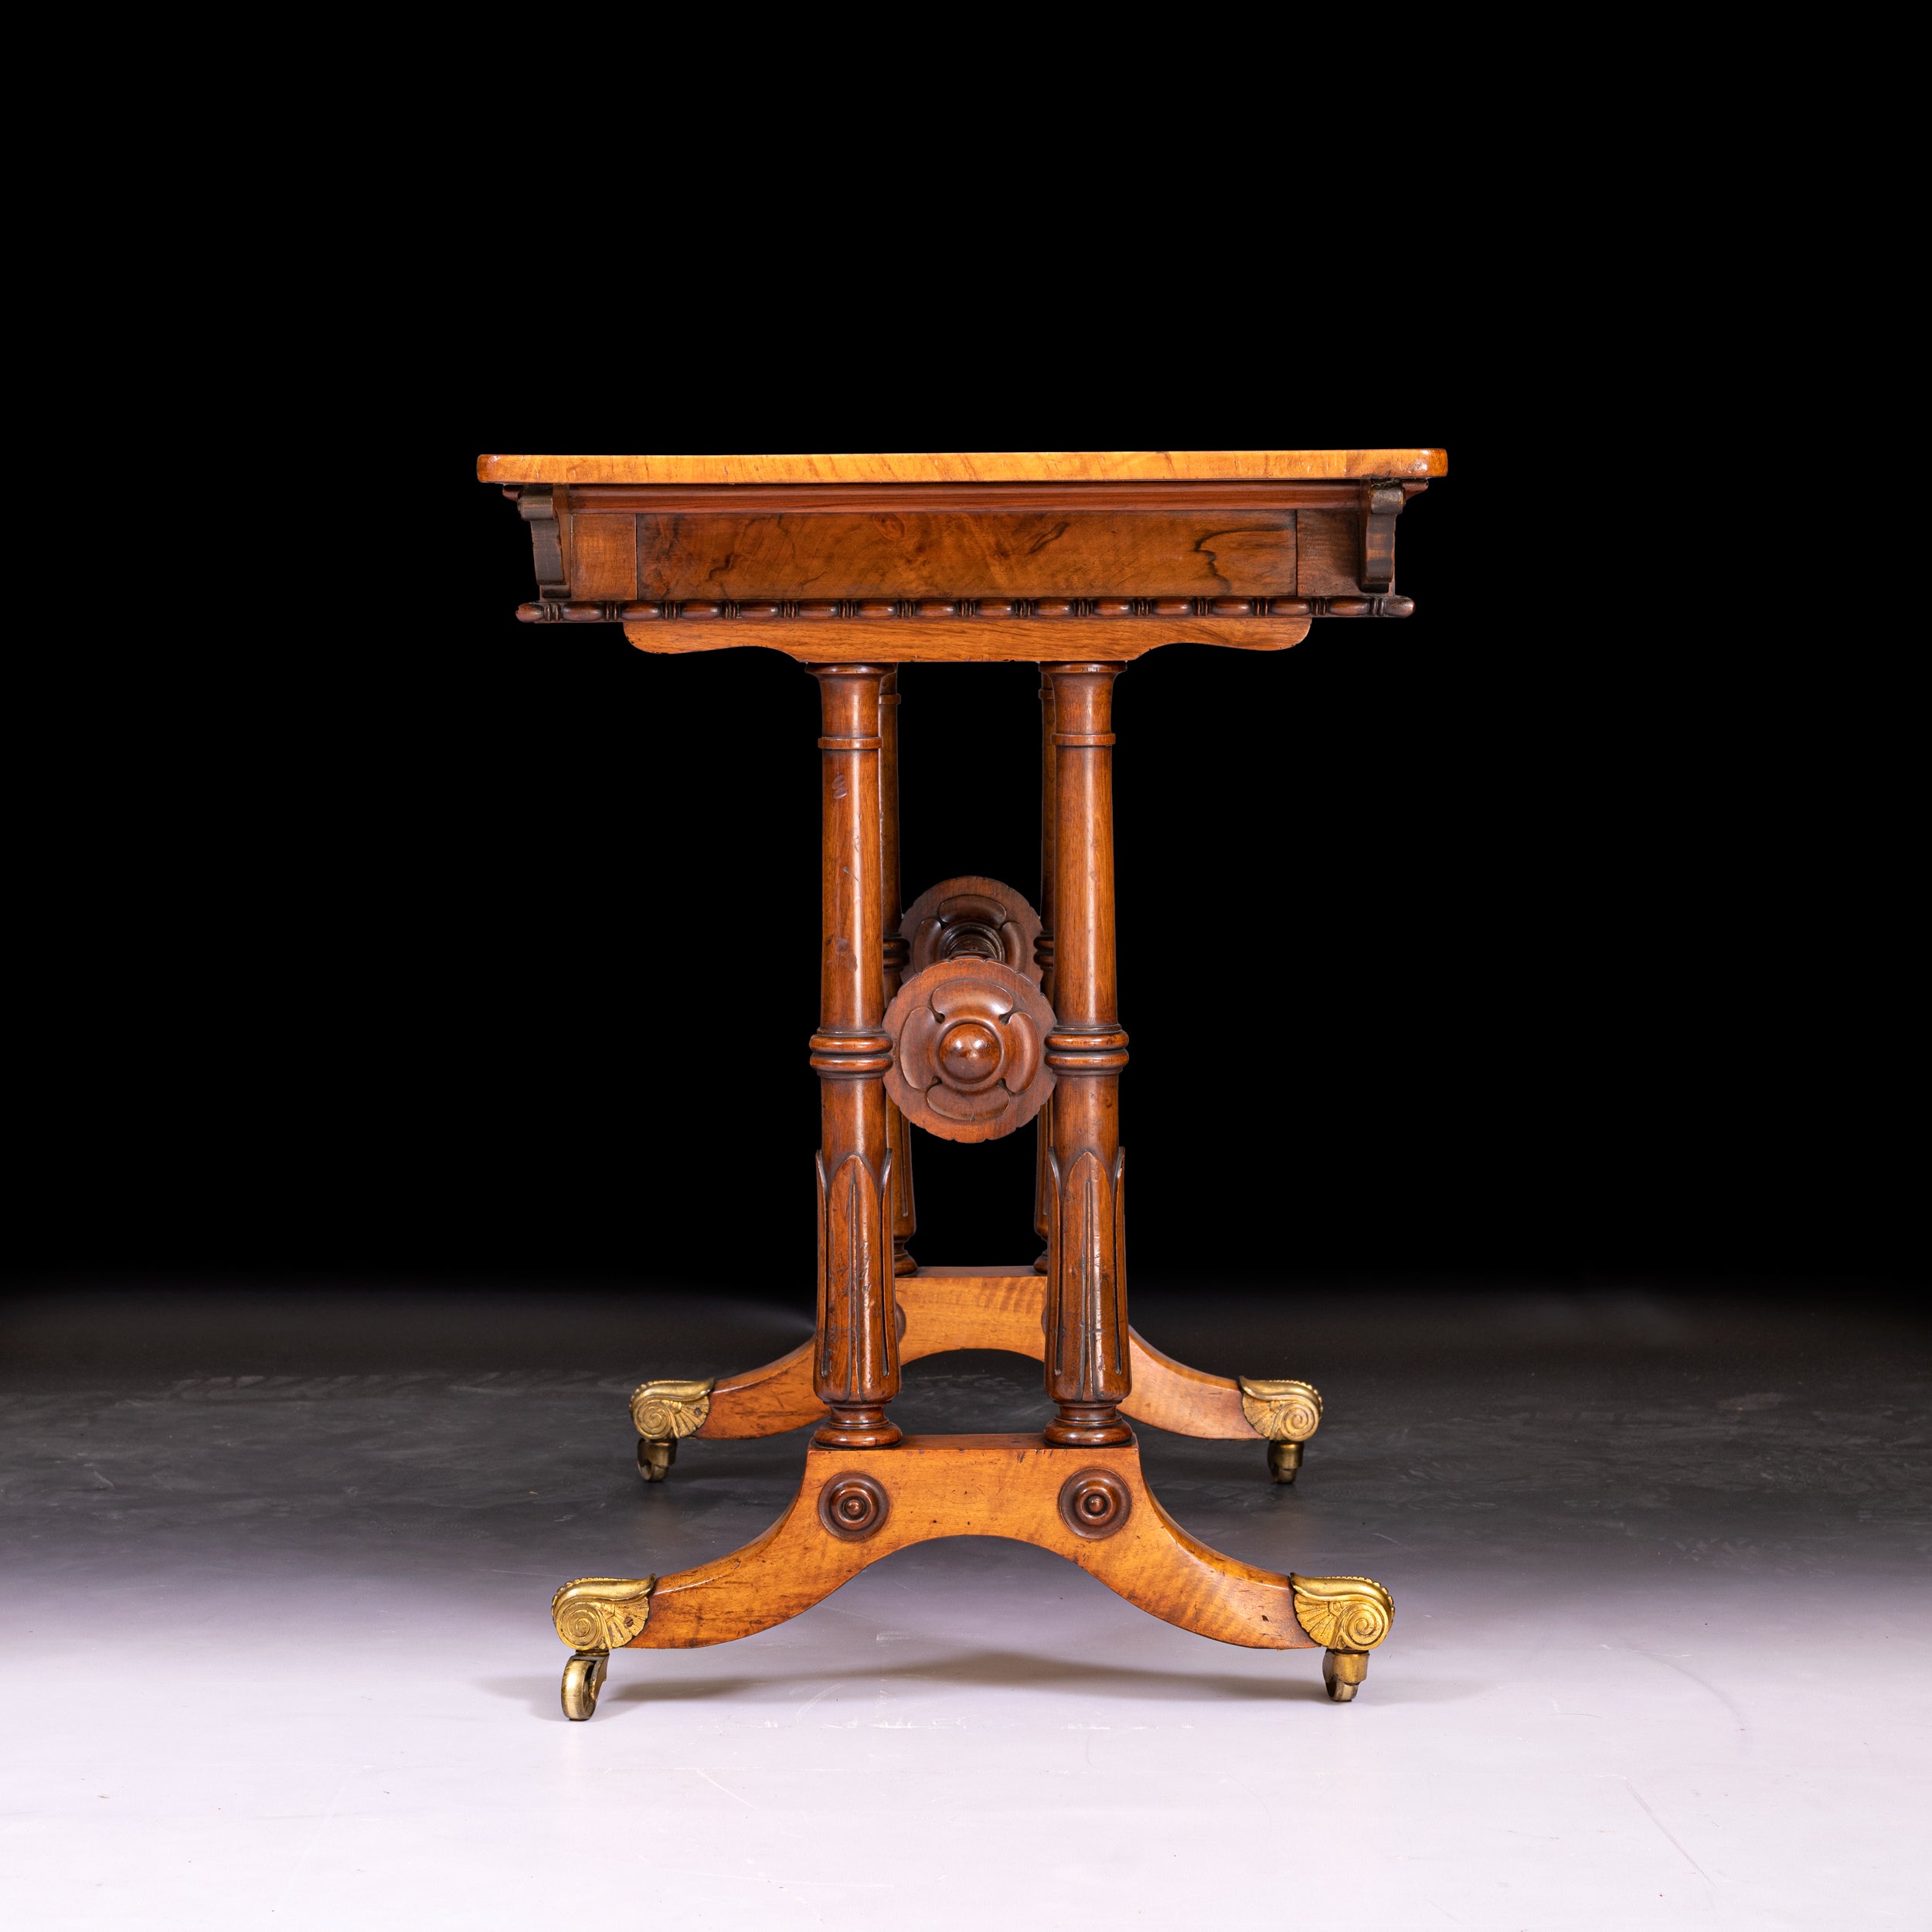 REGENCY WALNUT WRITING TABLE ATTRIBUTED TO HOLLAND & SONS  - REF No. 3013